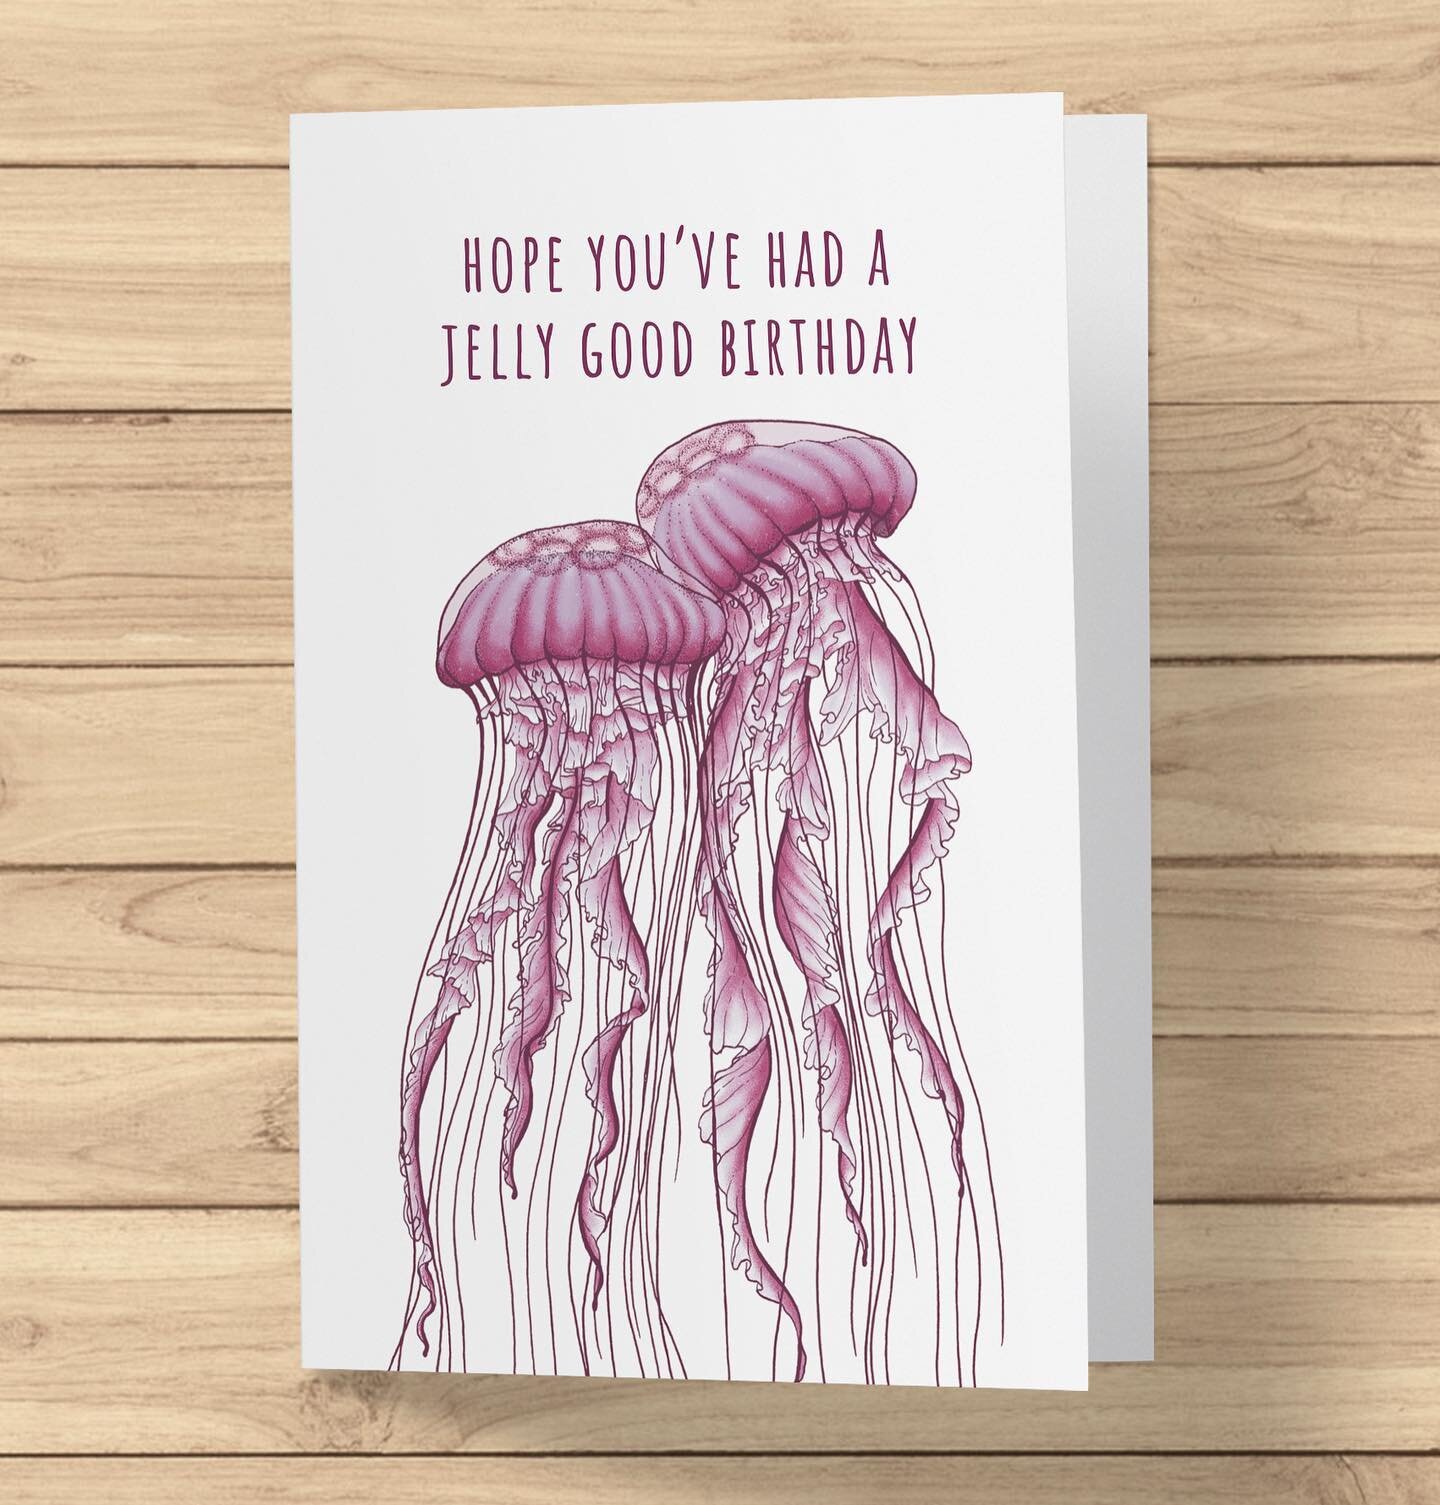 I&rsquo;ve heard jellyfish love a good party, and these two already look like they&rsquo;re dancing

&bull;&bull;&bull;

#jellyfish #jellyfishart #birthdaycard #funnybirthdaycards #micronpen #wildlifeart #wildlifeillustration #natureillustration #nat